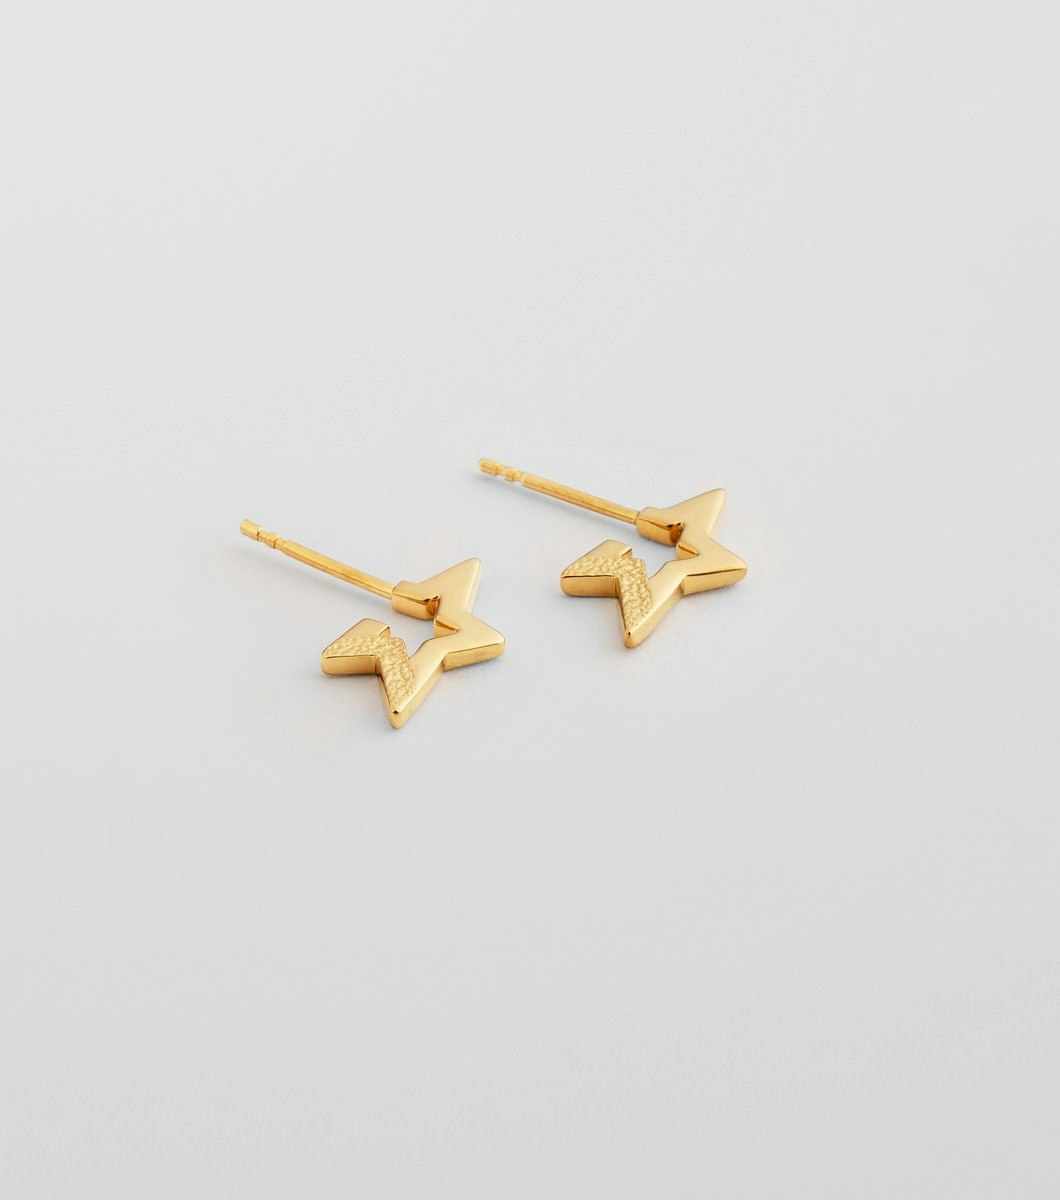 Megastar Small Earrings Gold Syster P